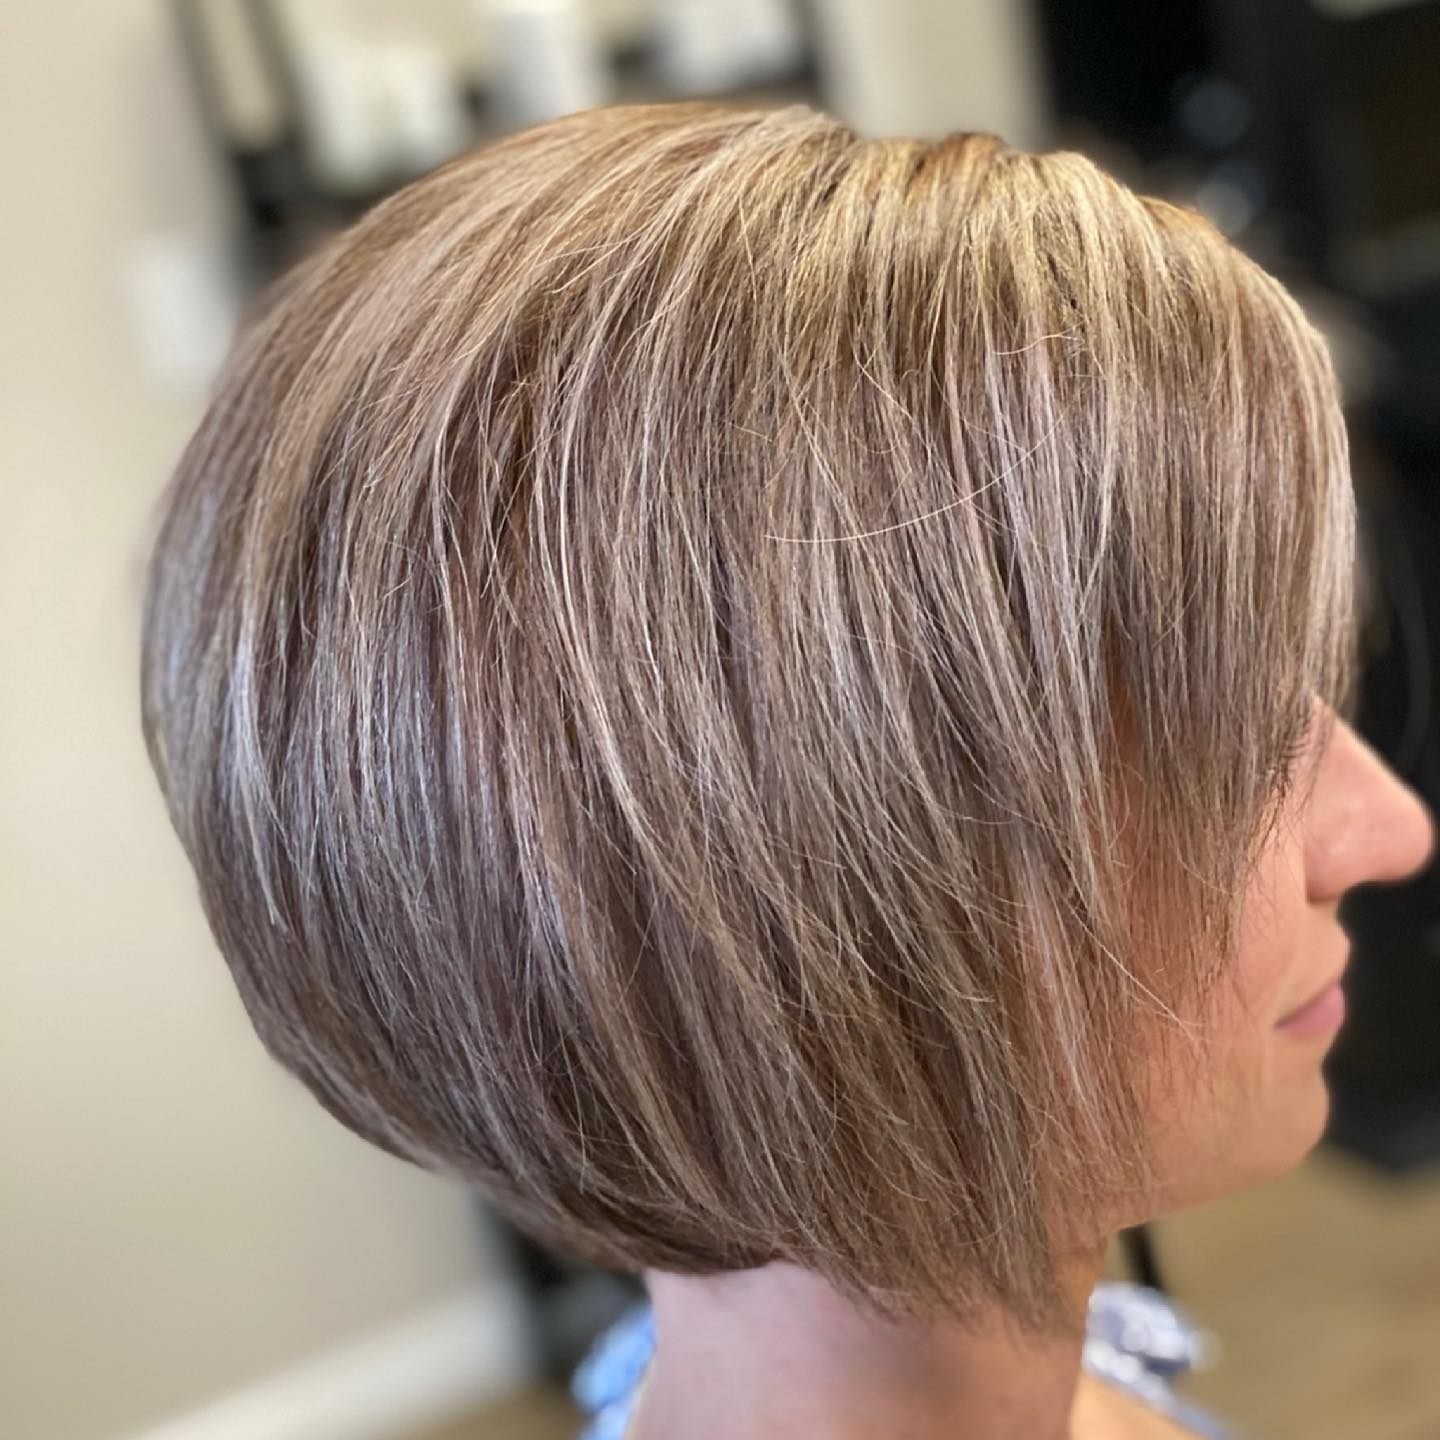 Stacked Bob 105 Long stacked bob | Medium length stacked bob | Pictures of stacked bob haircuts front and back Stacked Bob Hairstyles for Women